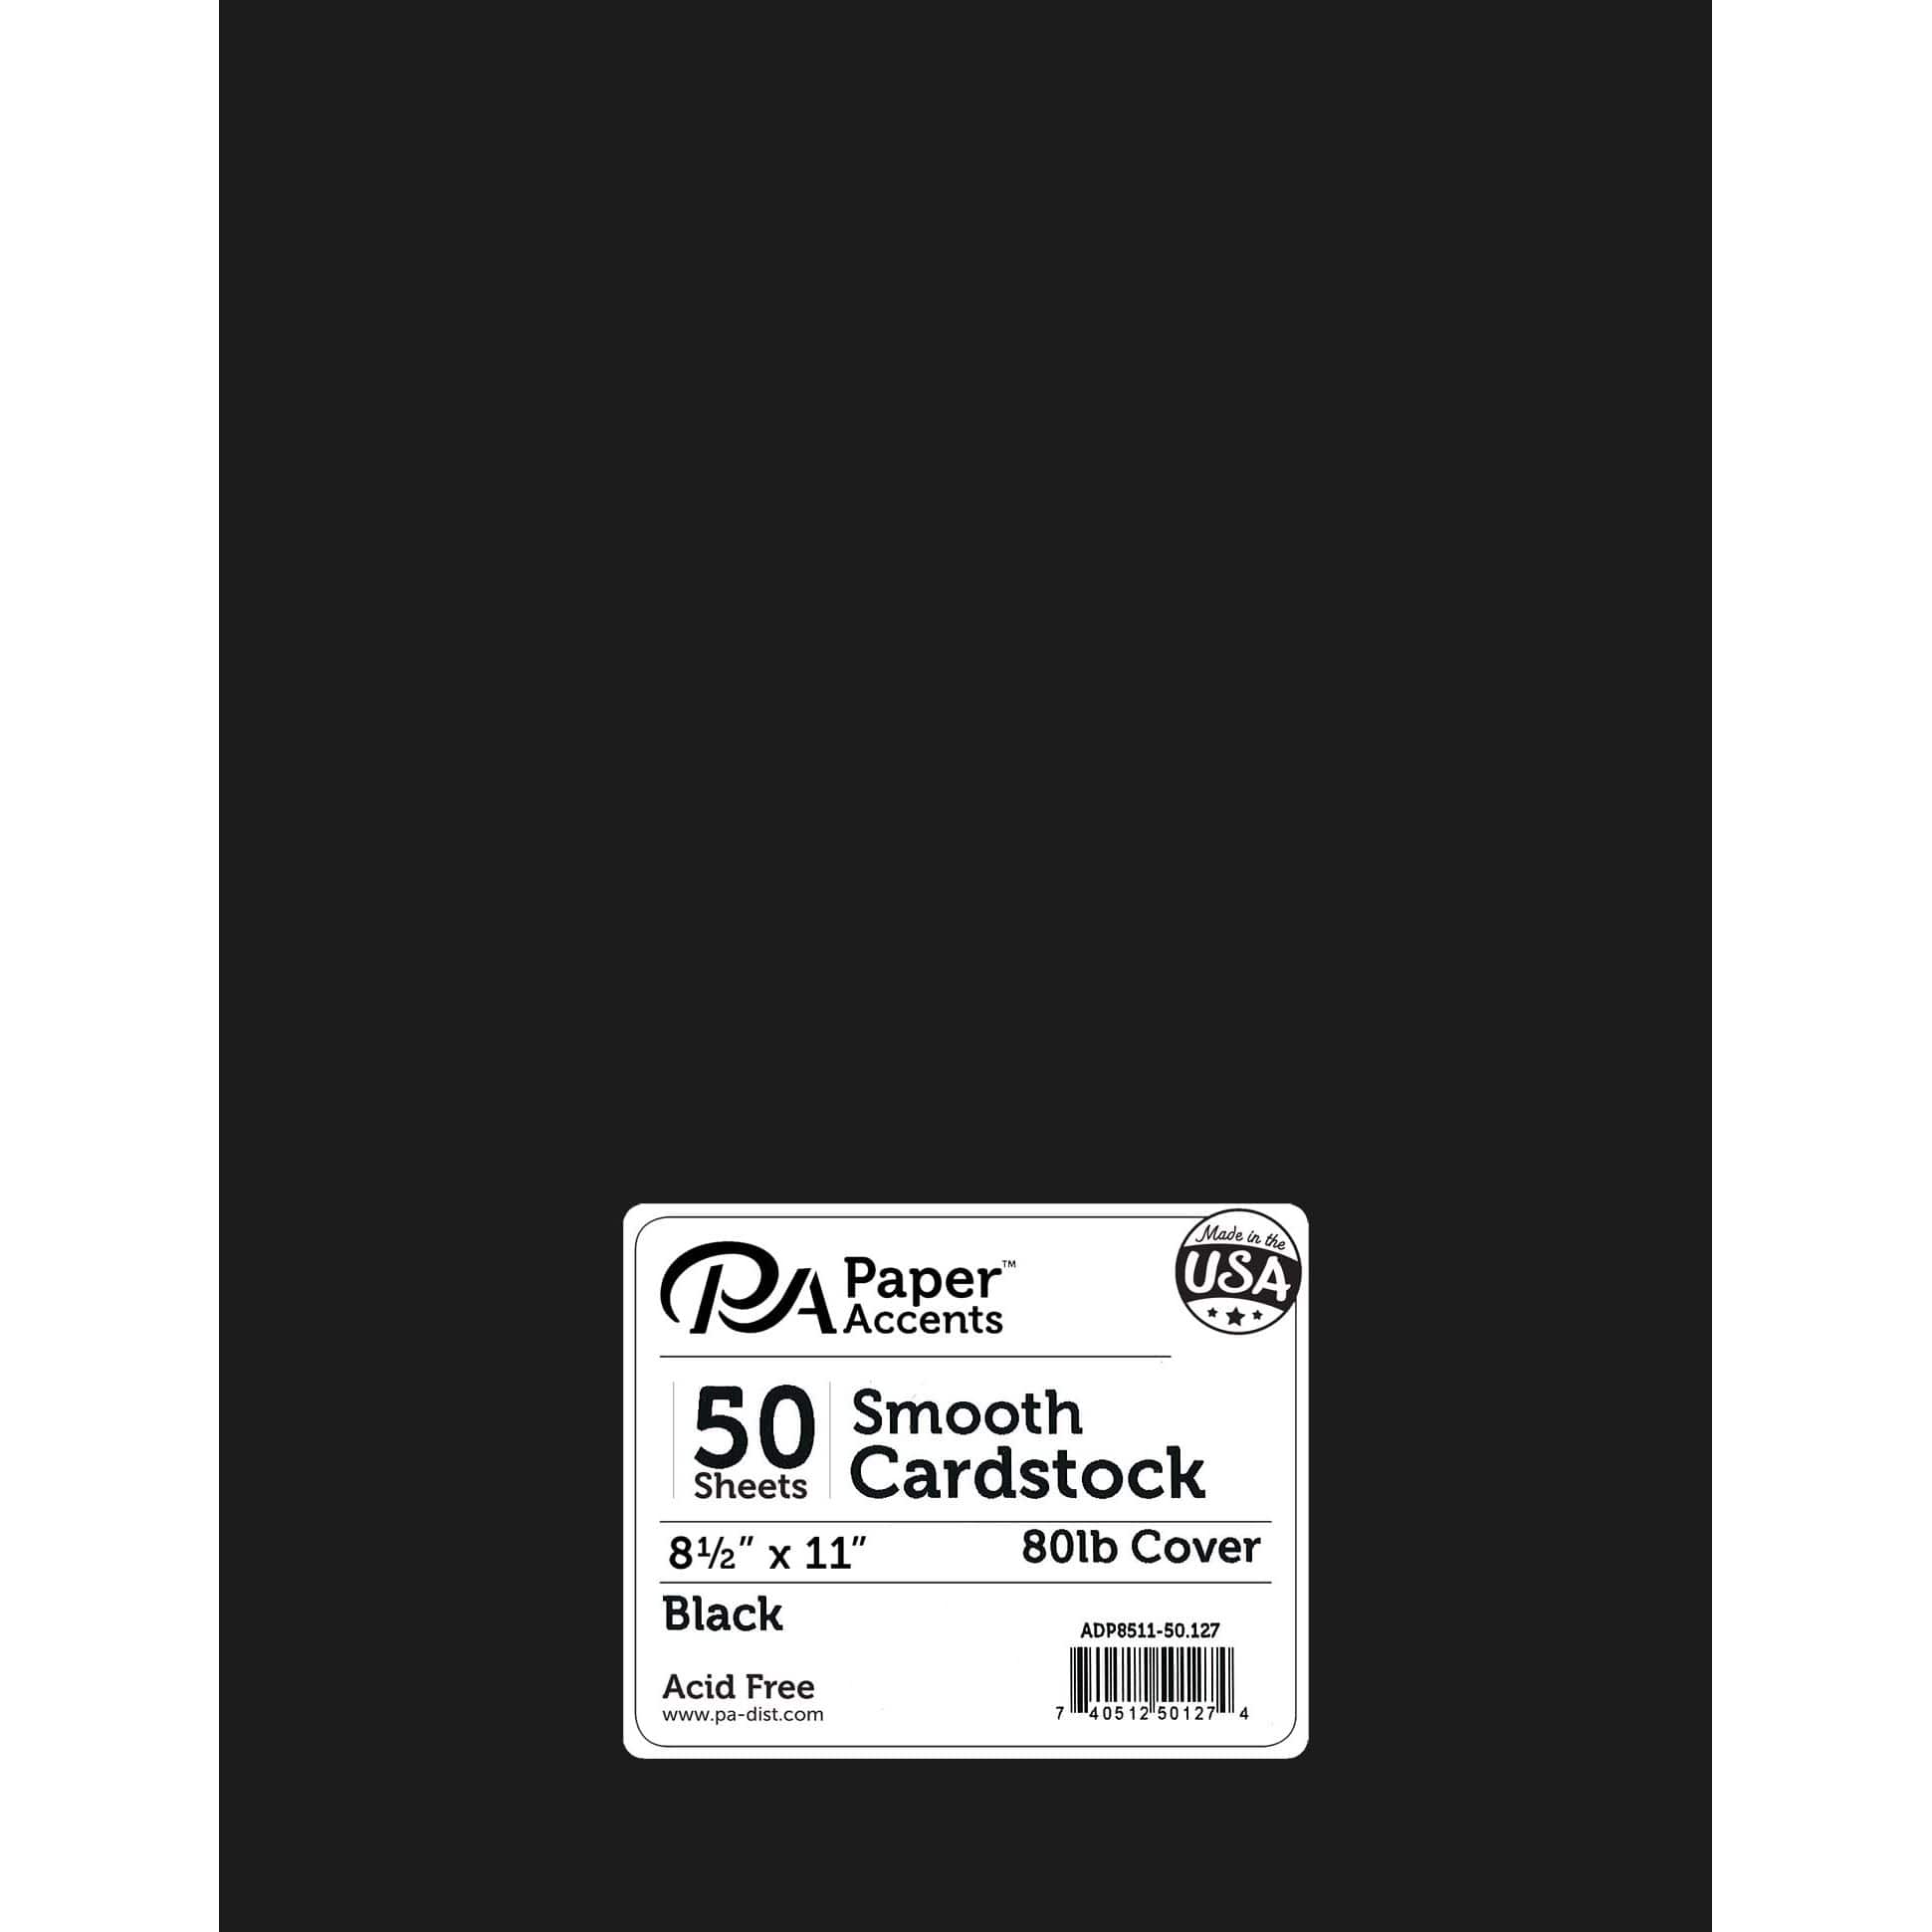 PA Paper™ Accents 8.5 x 11 80lb. Black Smooth Cardstock, 50 Sheets